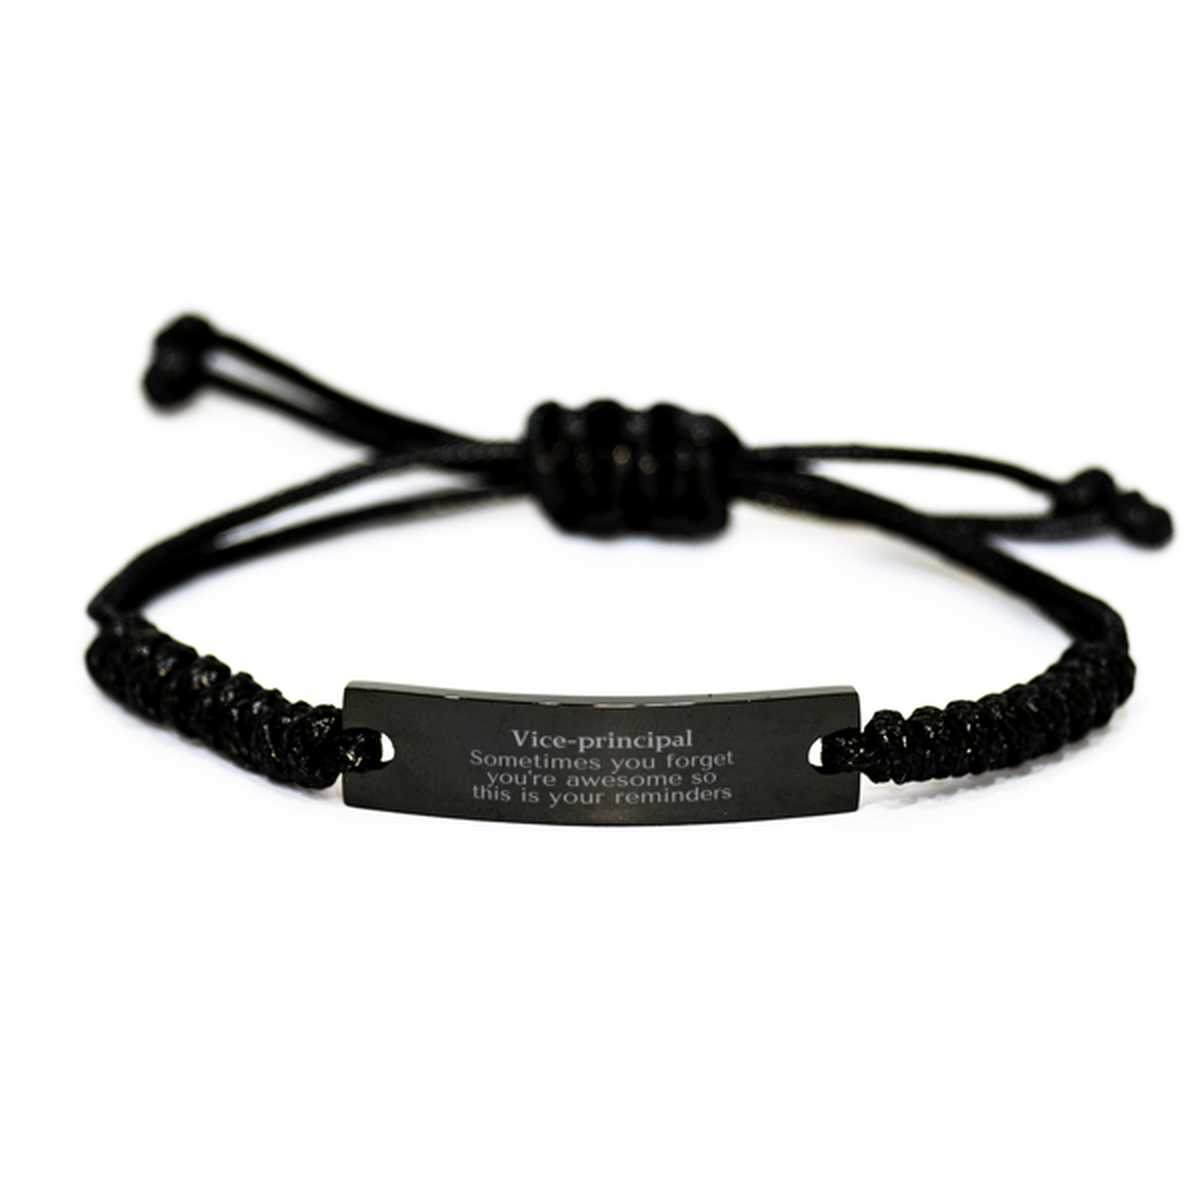 Sentimental Vice-principal Black Rope Bracelet, Vice-principal Sometimes you forget you're awesome so this is your reminders, Graduation Christmas Birthday Gifts for Vice-principal, Men, Women, Coworkers